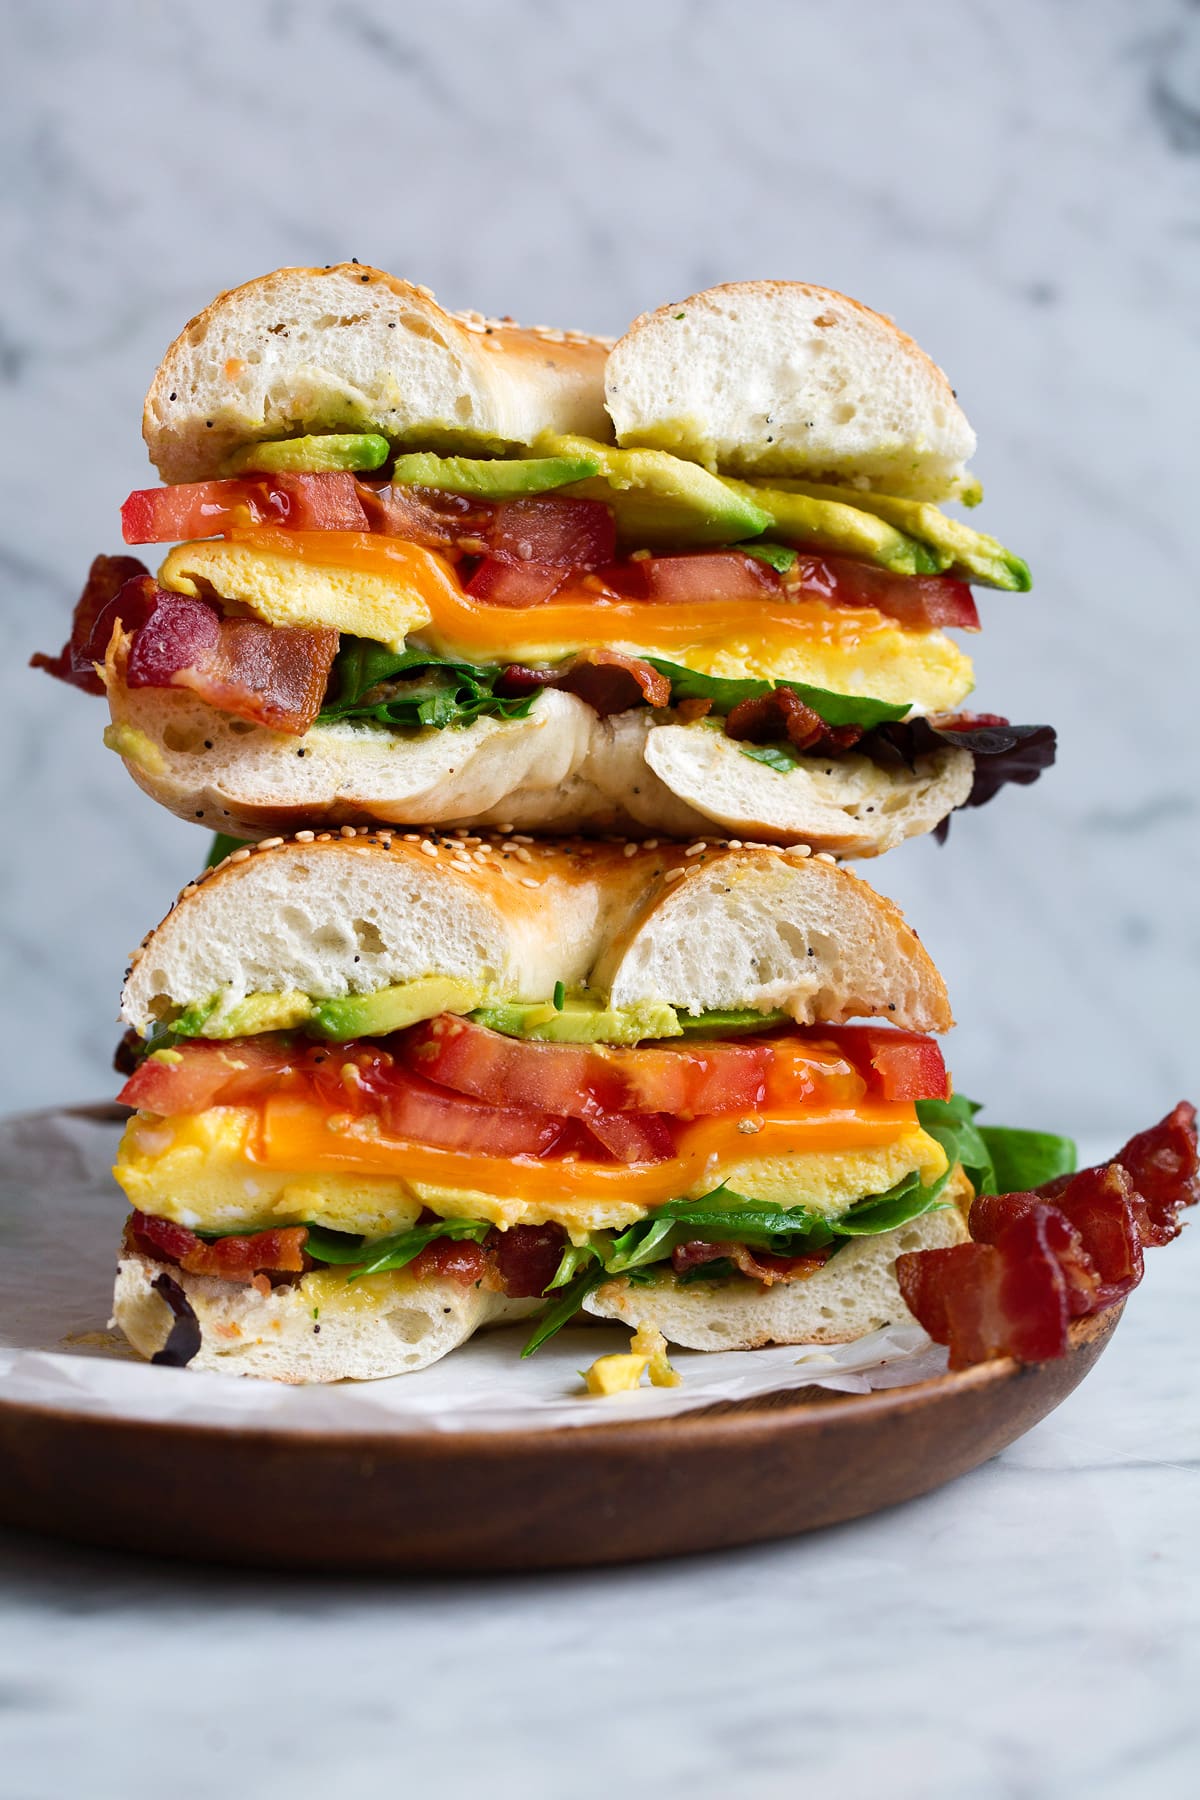 Bagel sandwich with microwave eggs, bacon, avocado, tomato, cheddar and lettuce. Sandwich is cut in half and stacked on a wooden plate set over a marble surface.